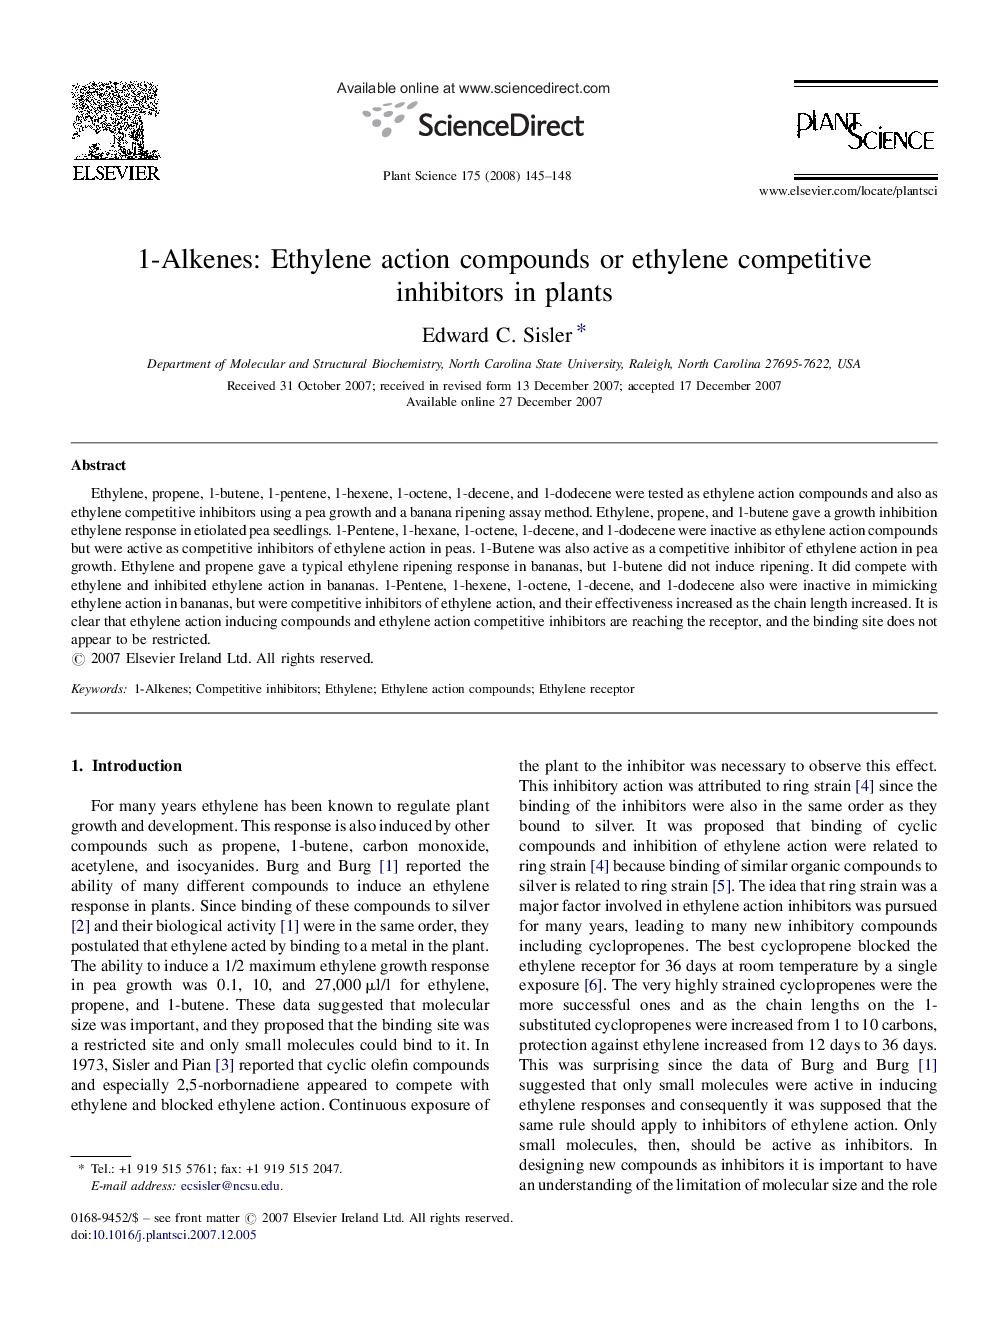 1-Alkenes: Ethylene action compounds or ethylene competitive inhibitors in plants